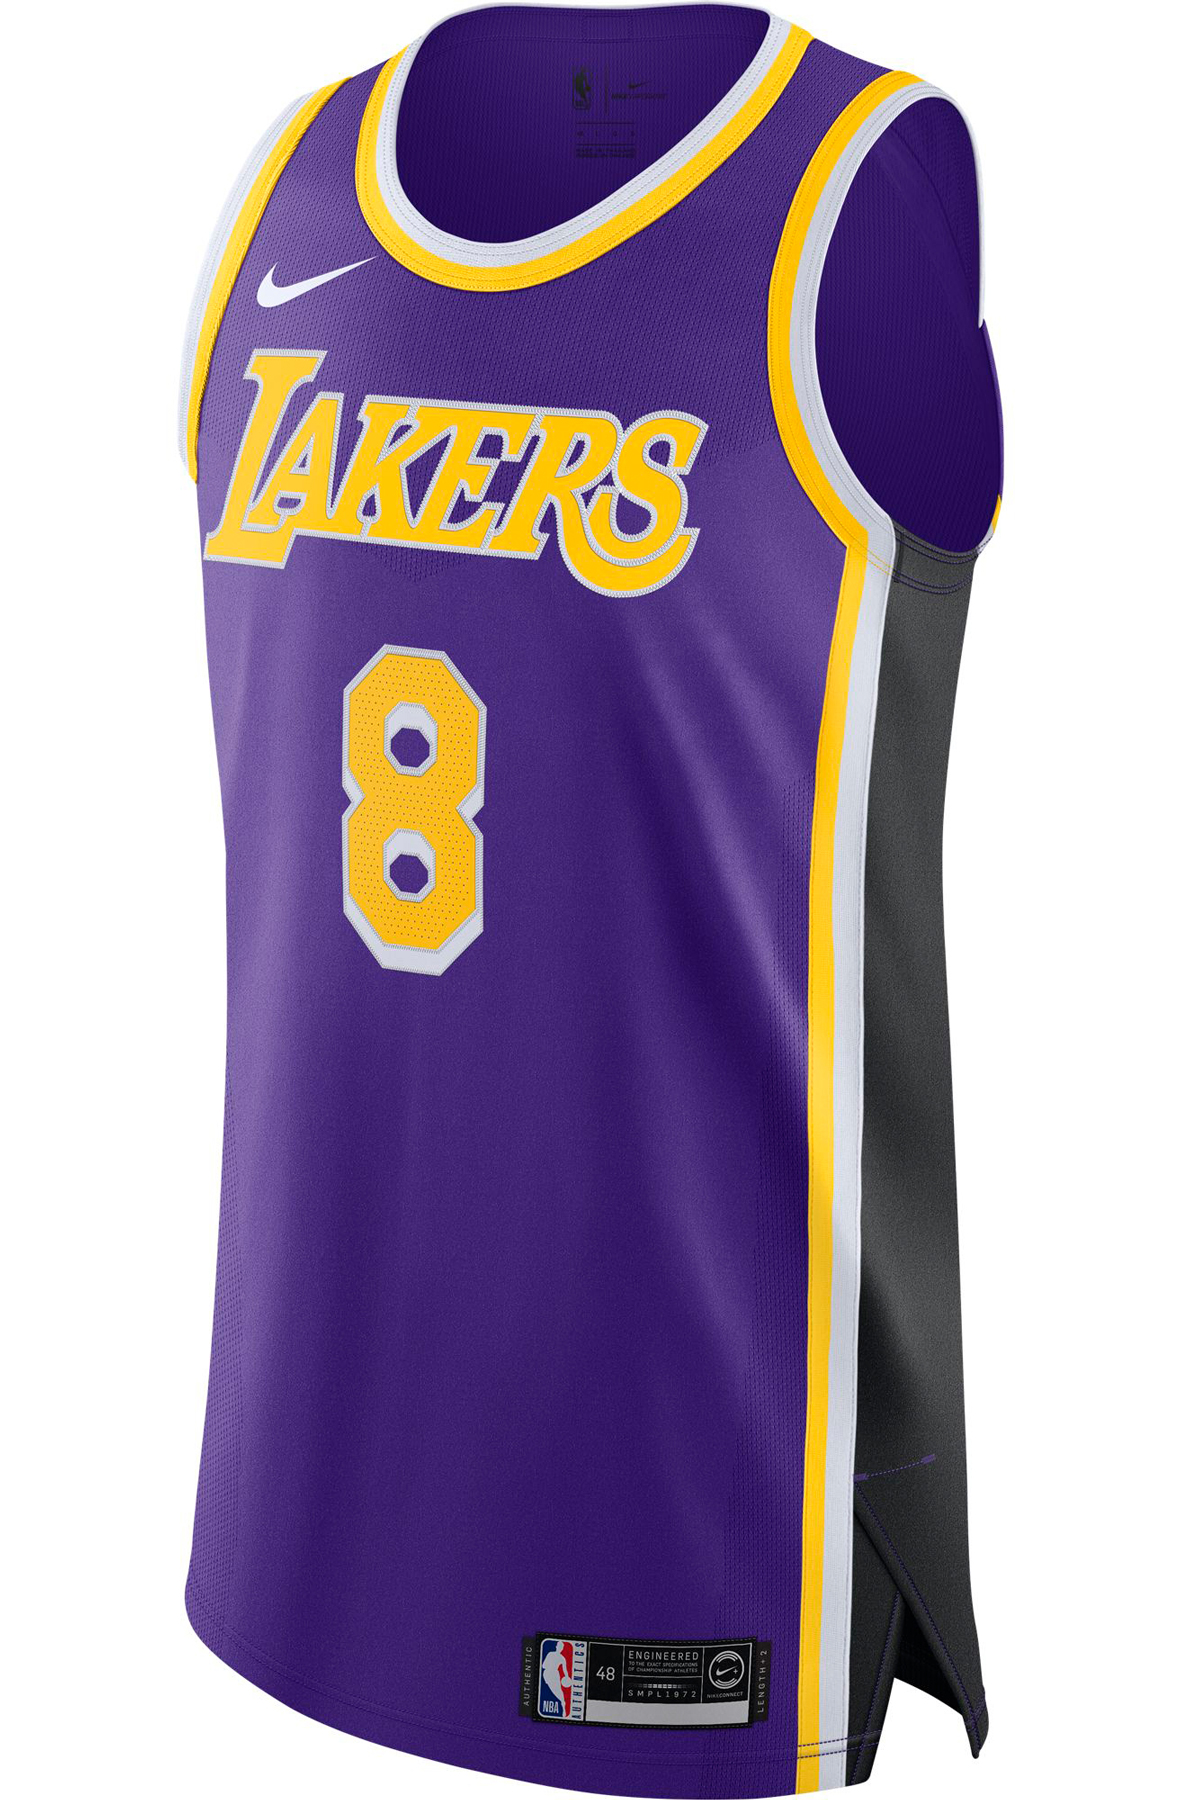 Lakers Statement Edition Jersey 22/23 Bryant (Kitgg) Swingman Version  Unboxing Review 